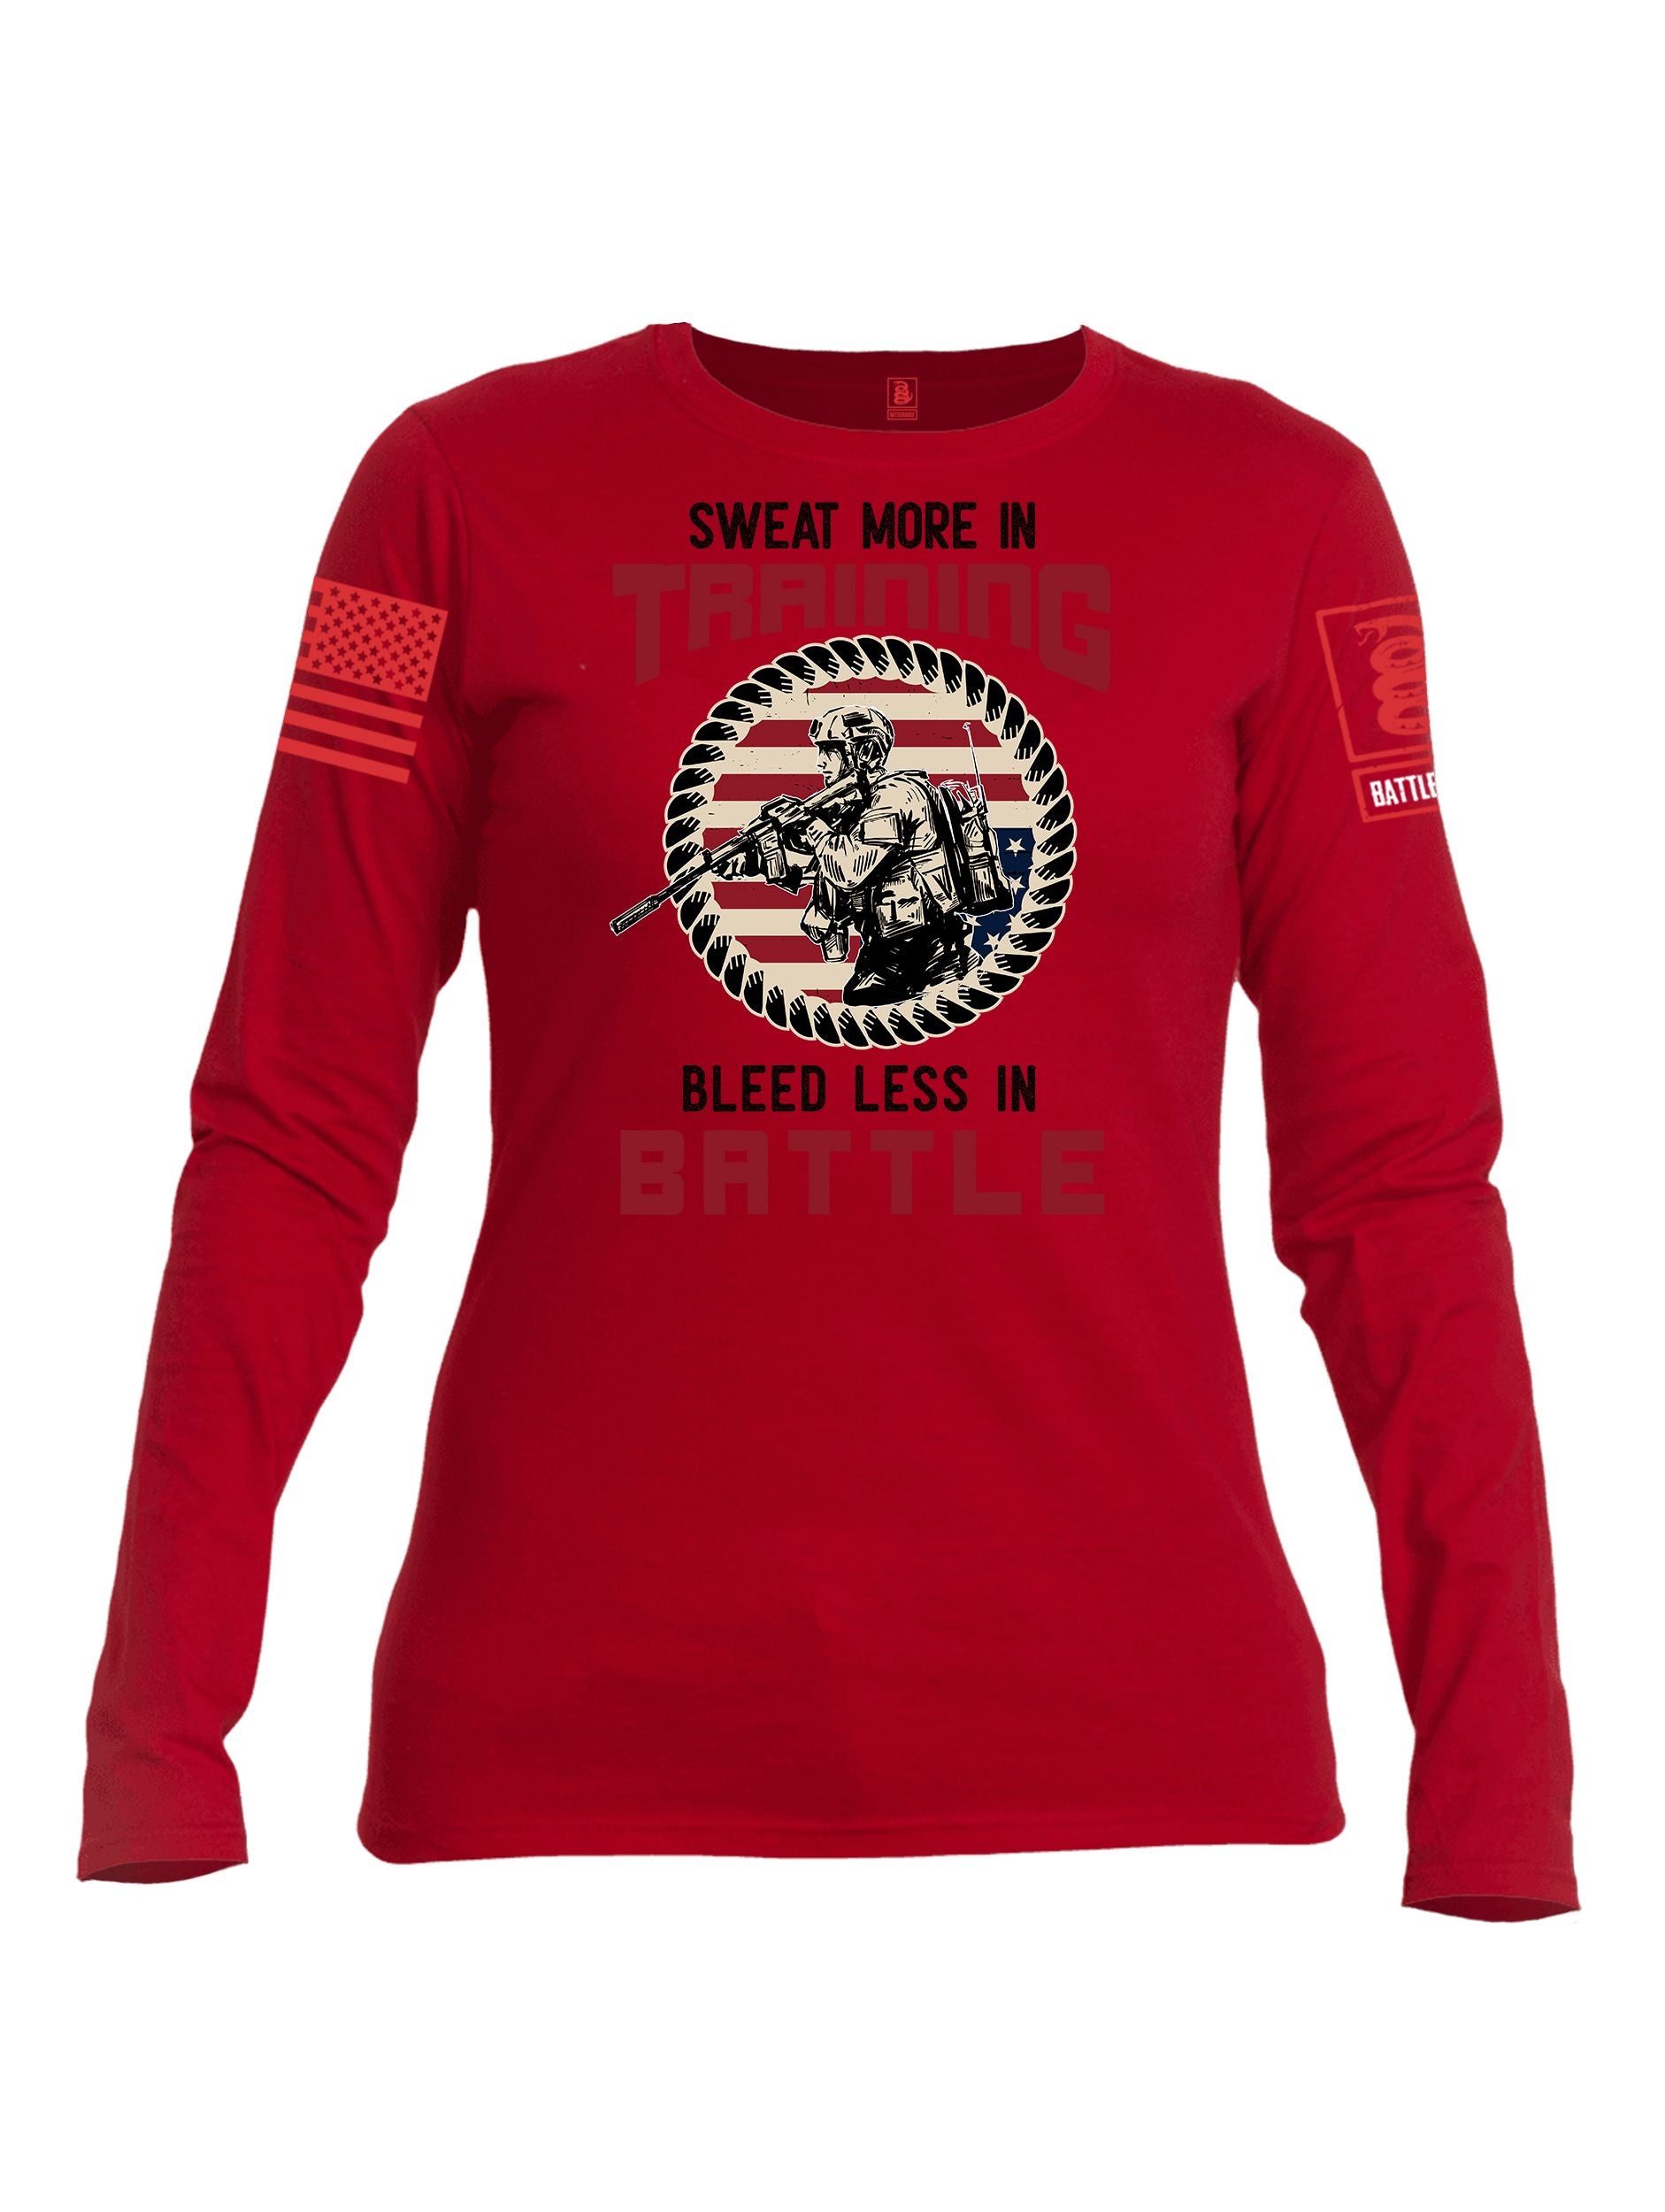 Battleraddle Sweat More In Training  Red Sleeves Women Cotton Crew Neck Long Sleeve T Shirt